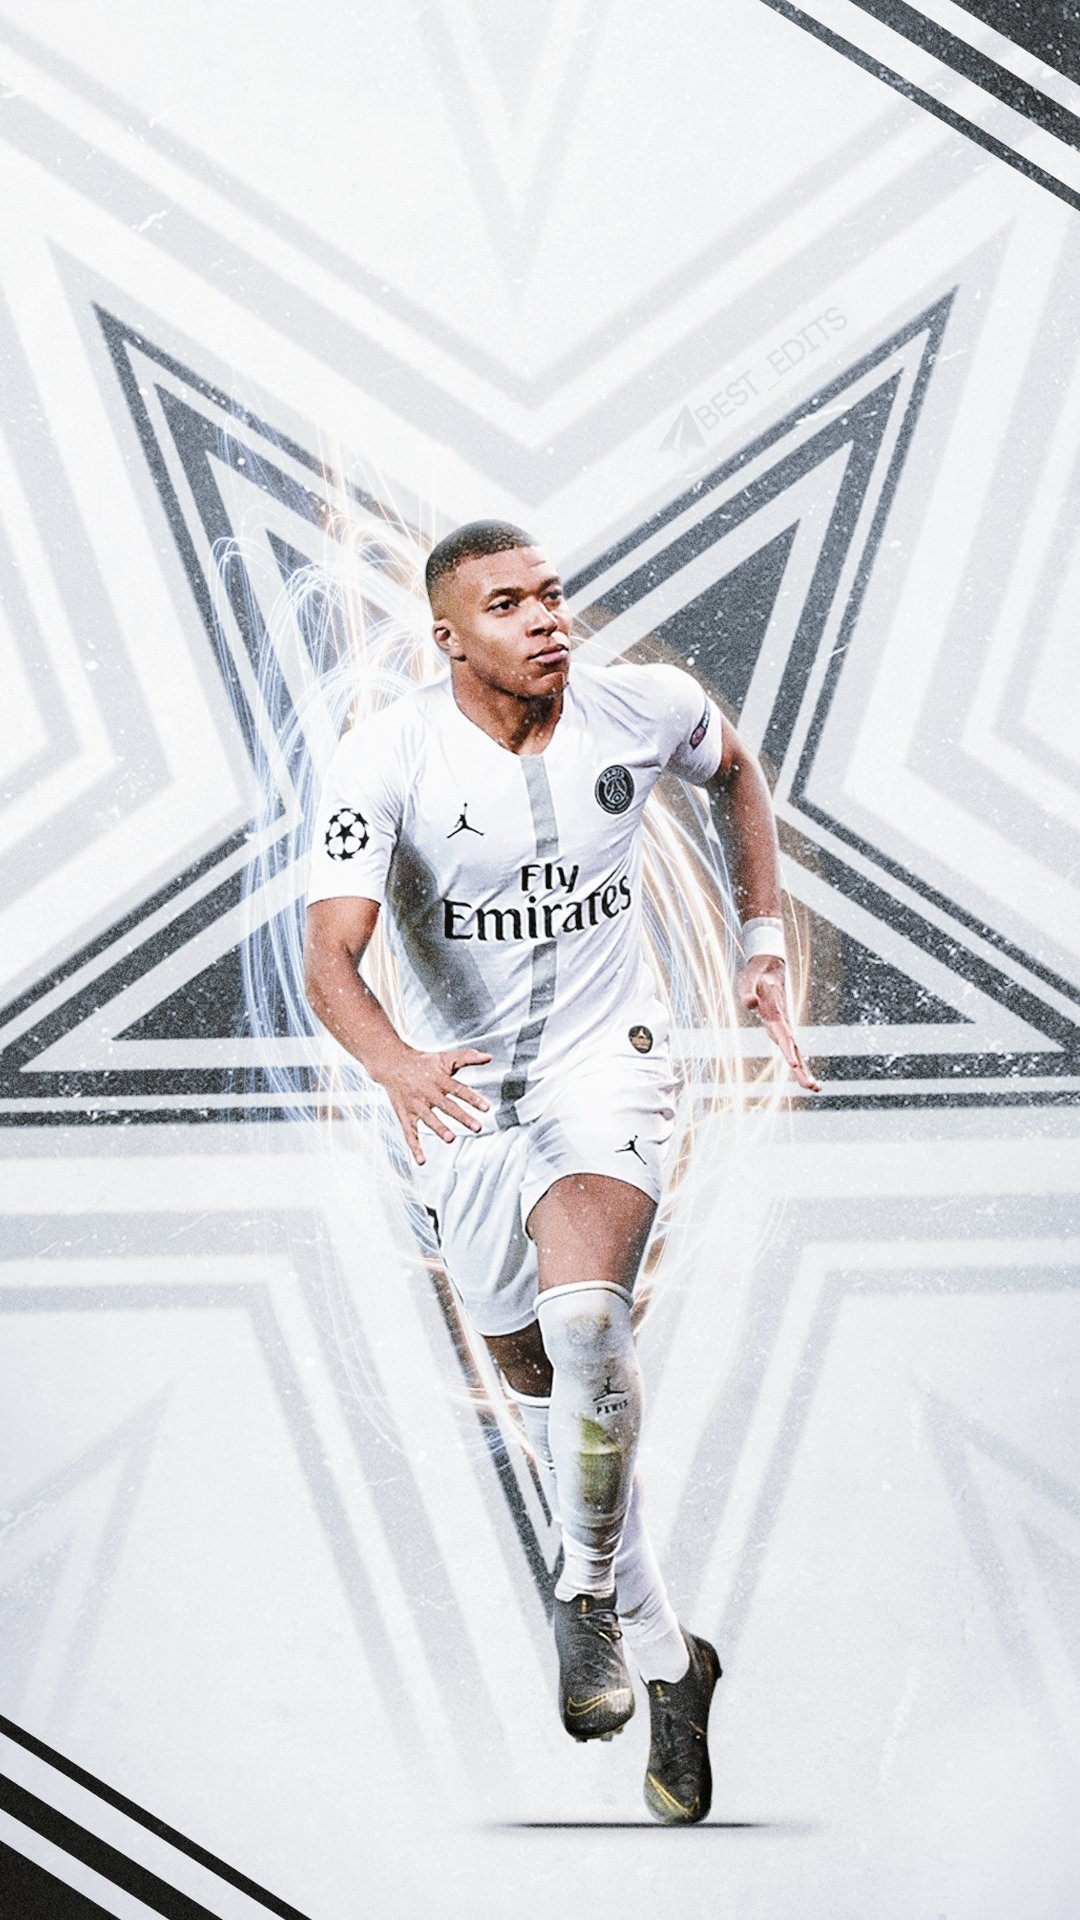 Kylian Mbappe Wallpapers Hd For Iphone Visual Arts Ideas